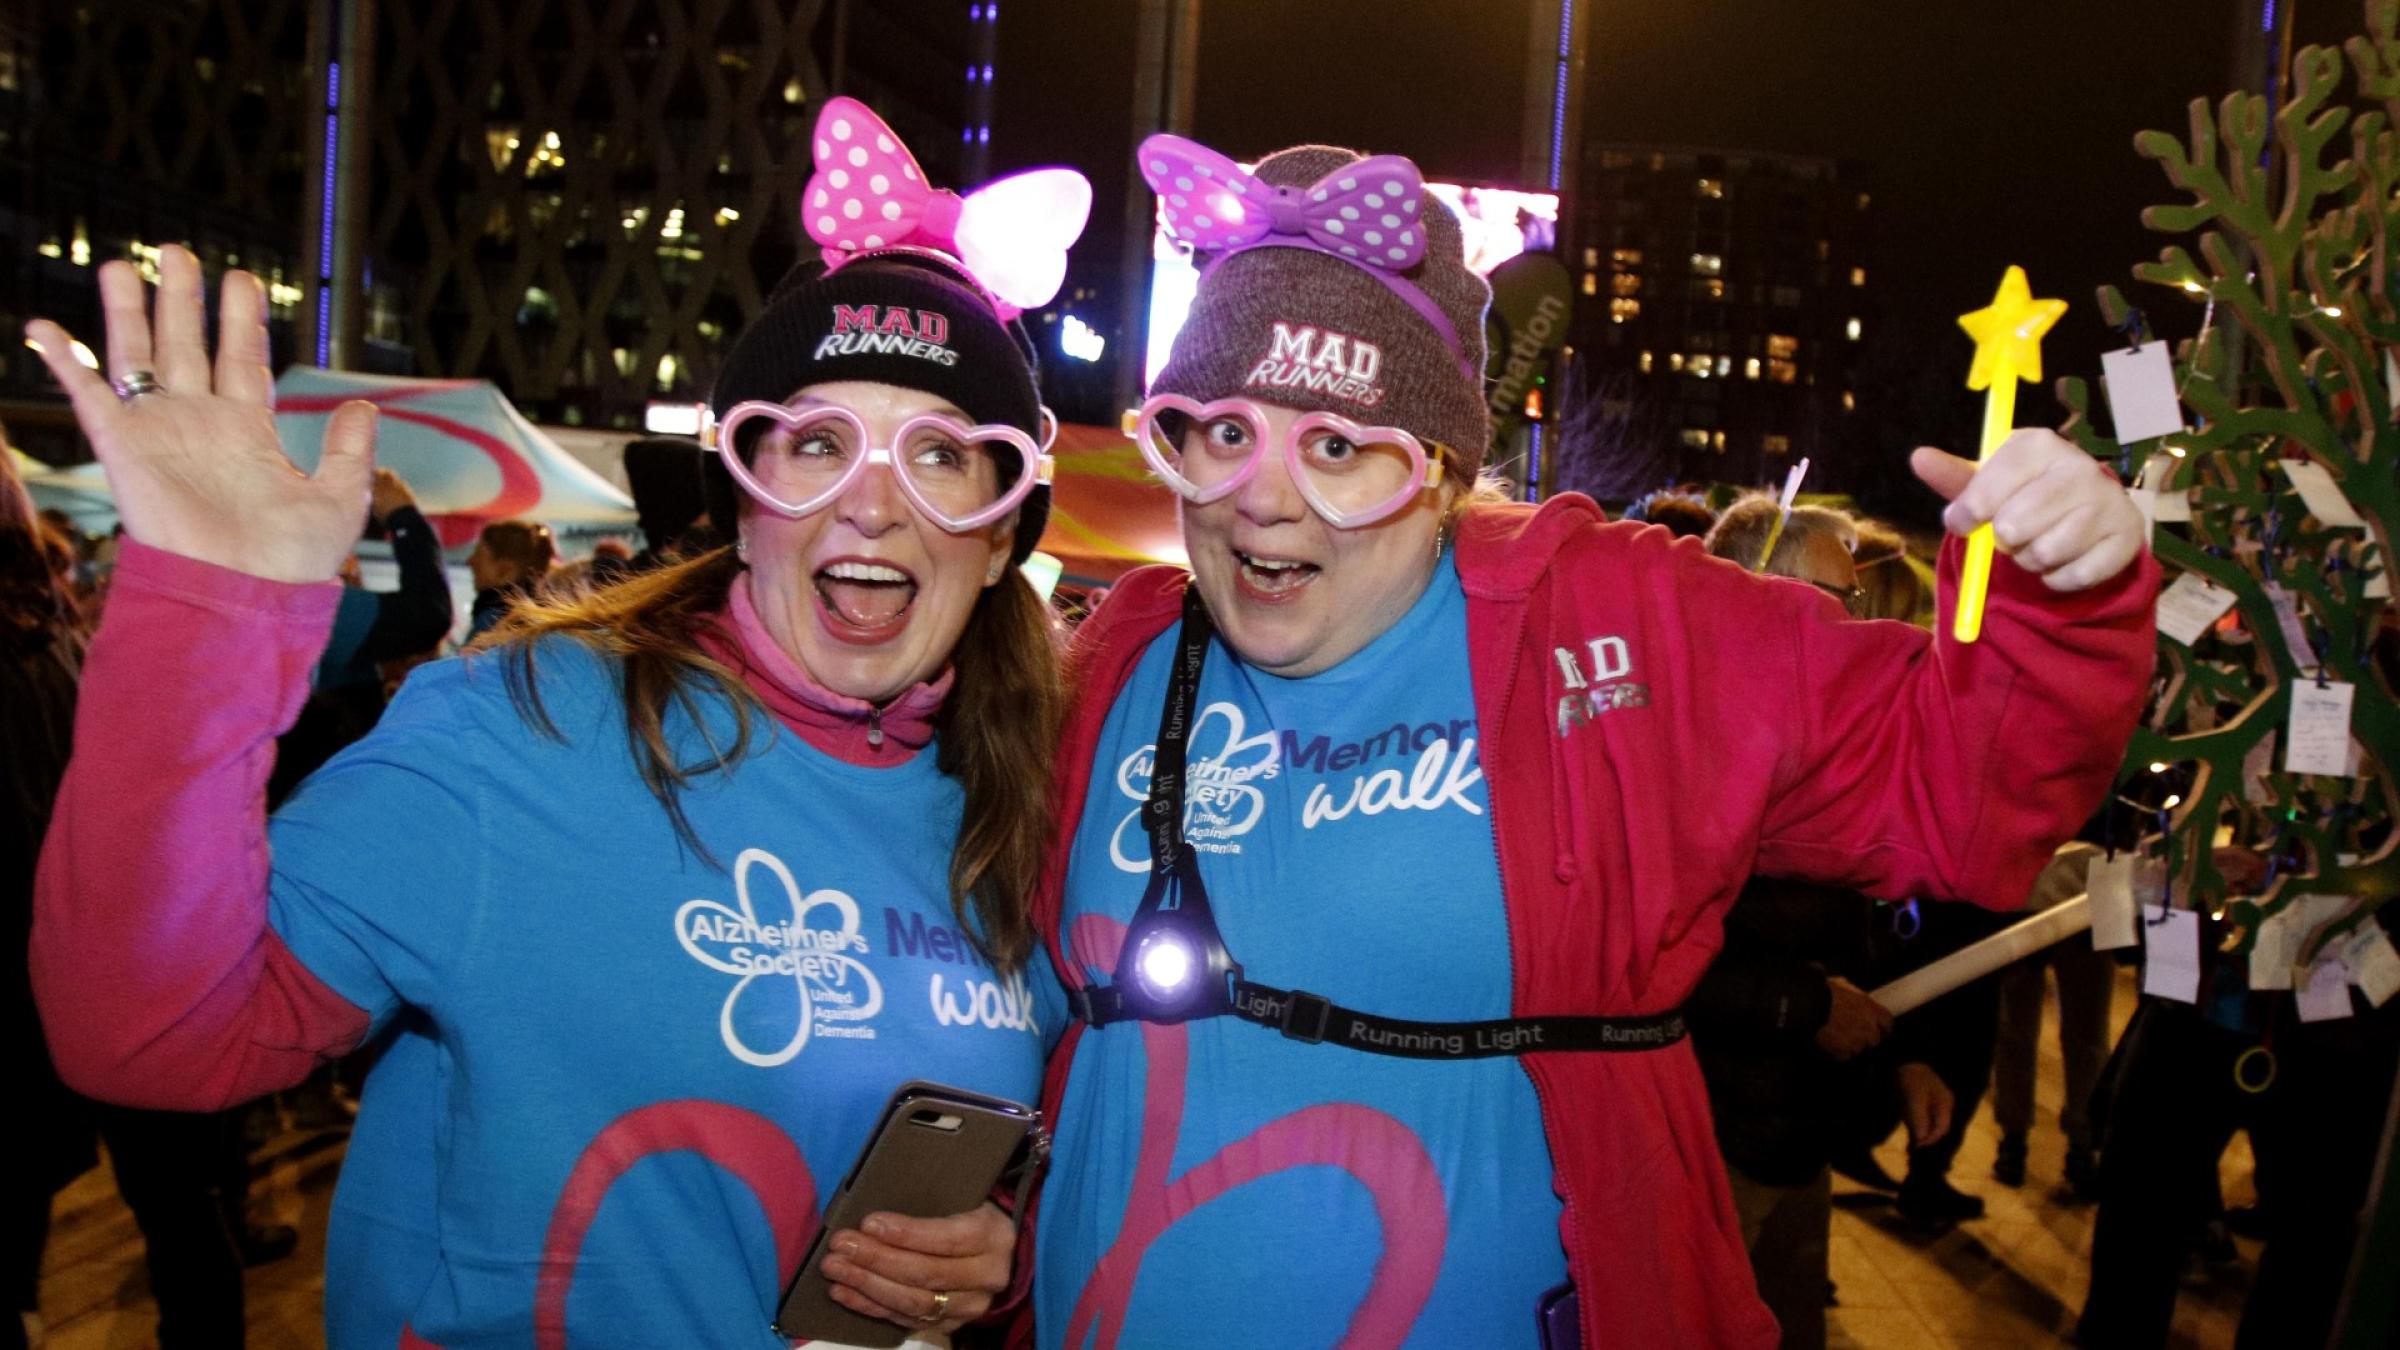 Two ladies dressed up for Glow walk smiling